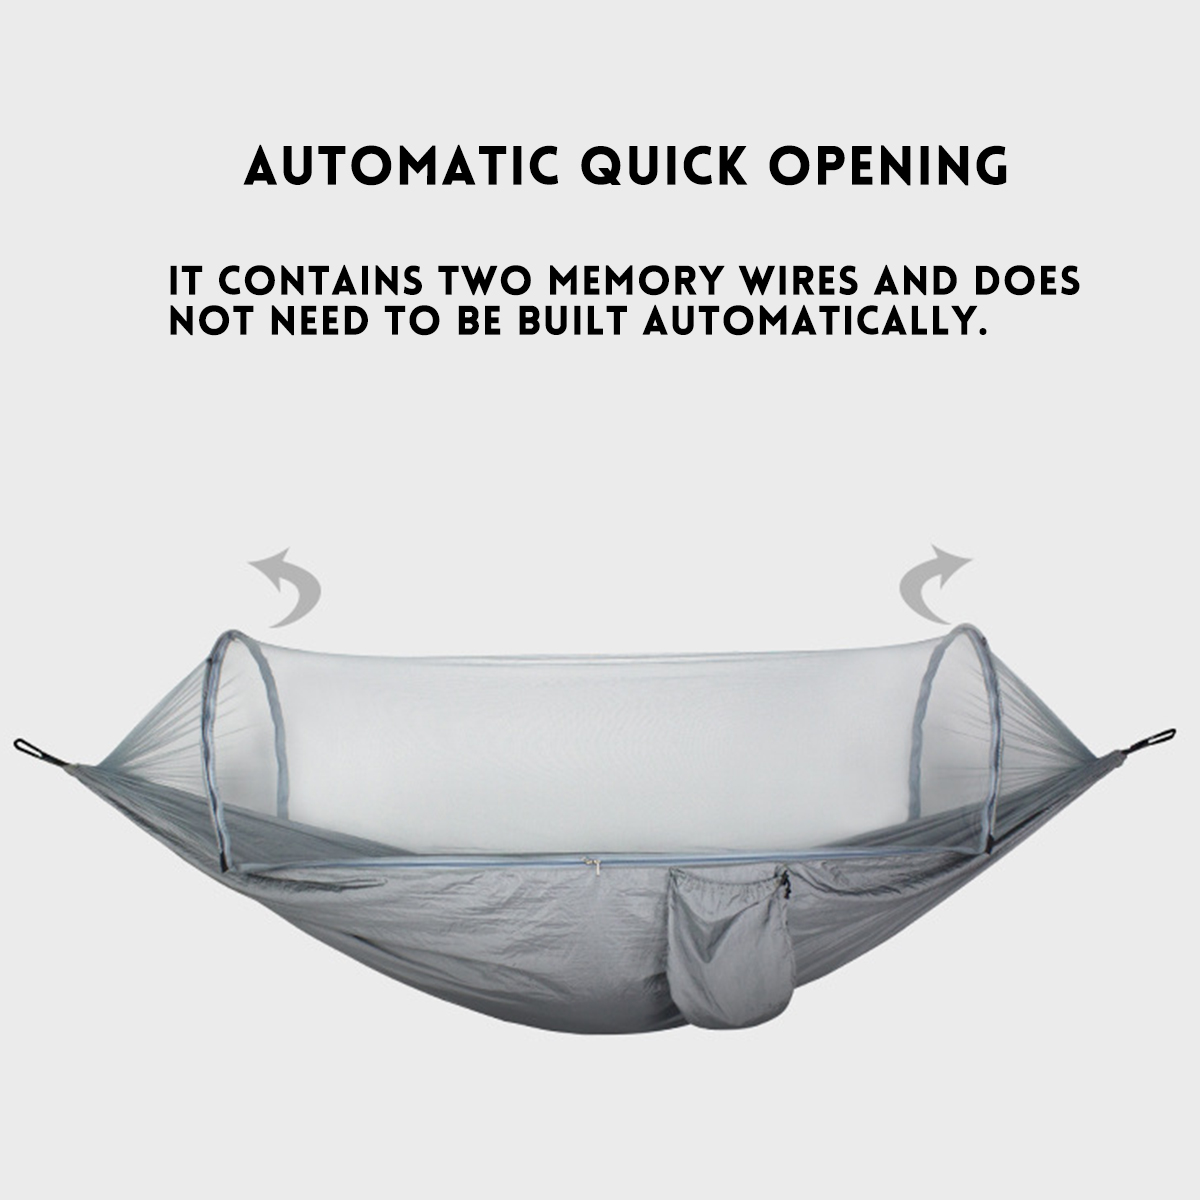 210T-Nylon-Hammock-Ourdoor-Camping-Travel-Hanging-Bed-With-Mosquito-Net-1627391-3